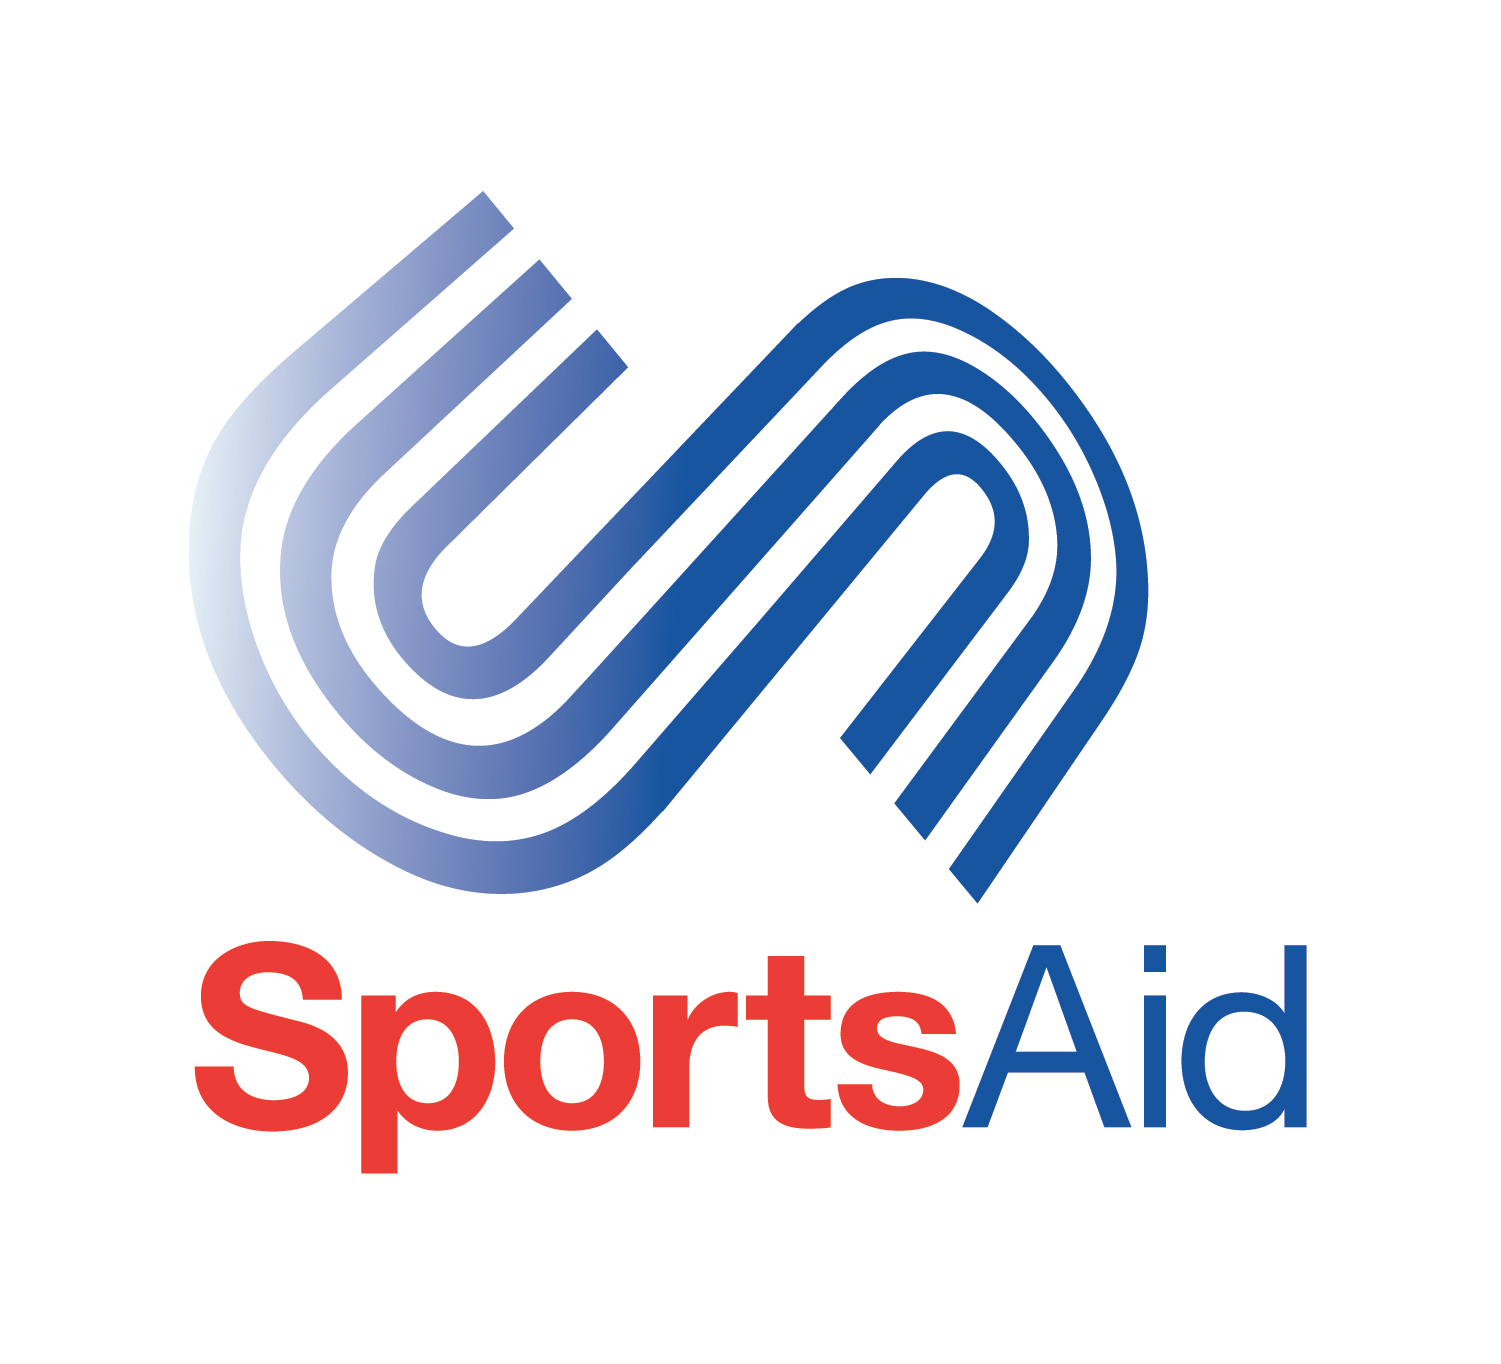 SportsAid logo with the word sport in red and aid in blue with an S above in the design of a running track.